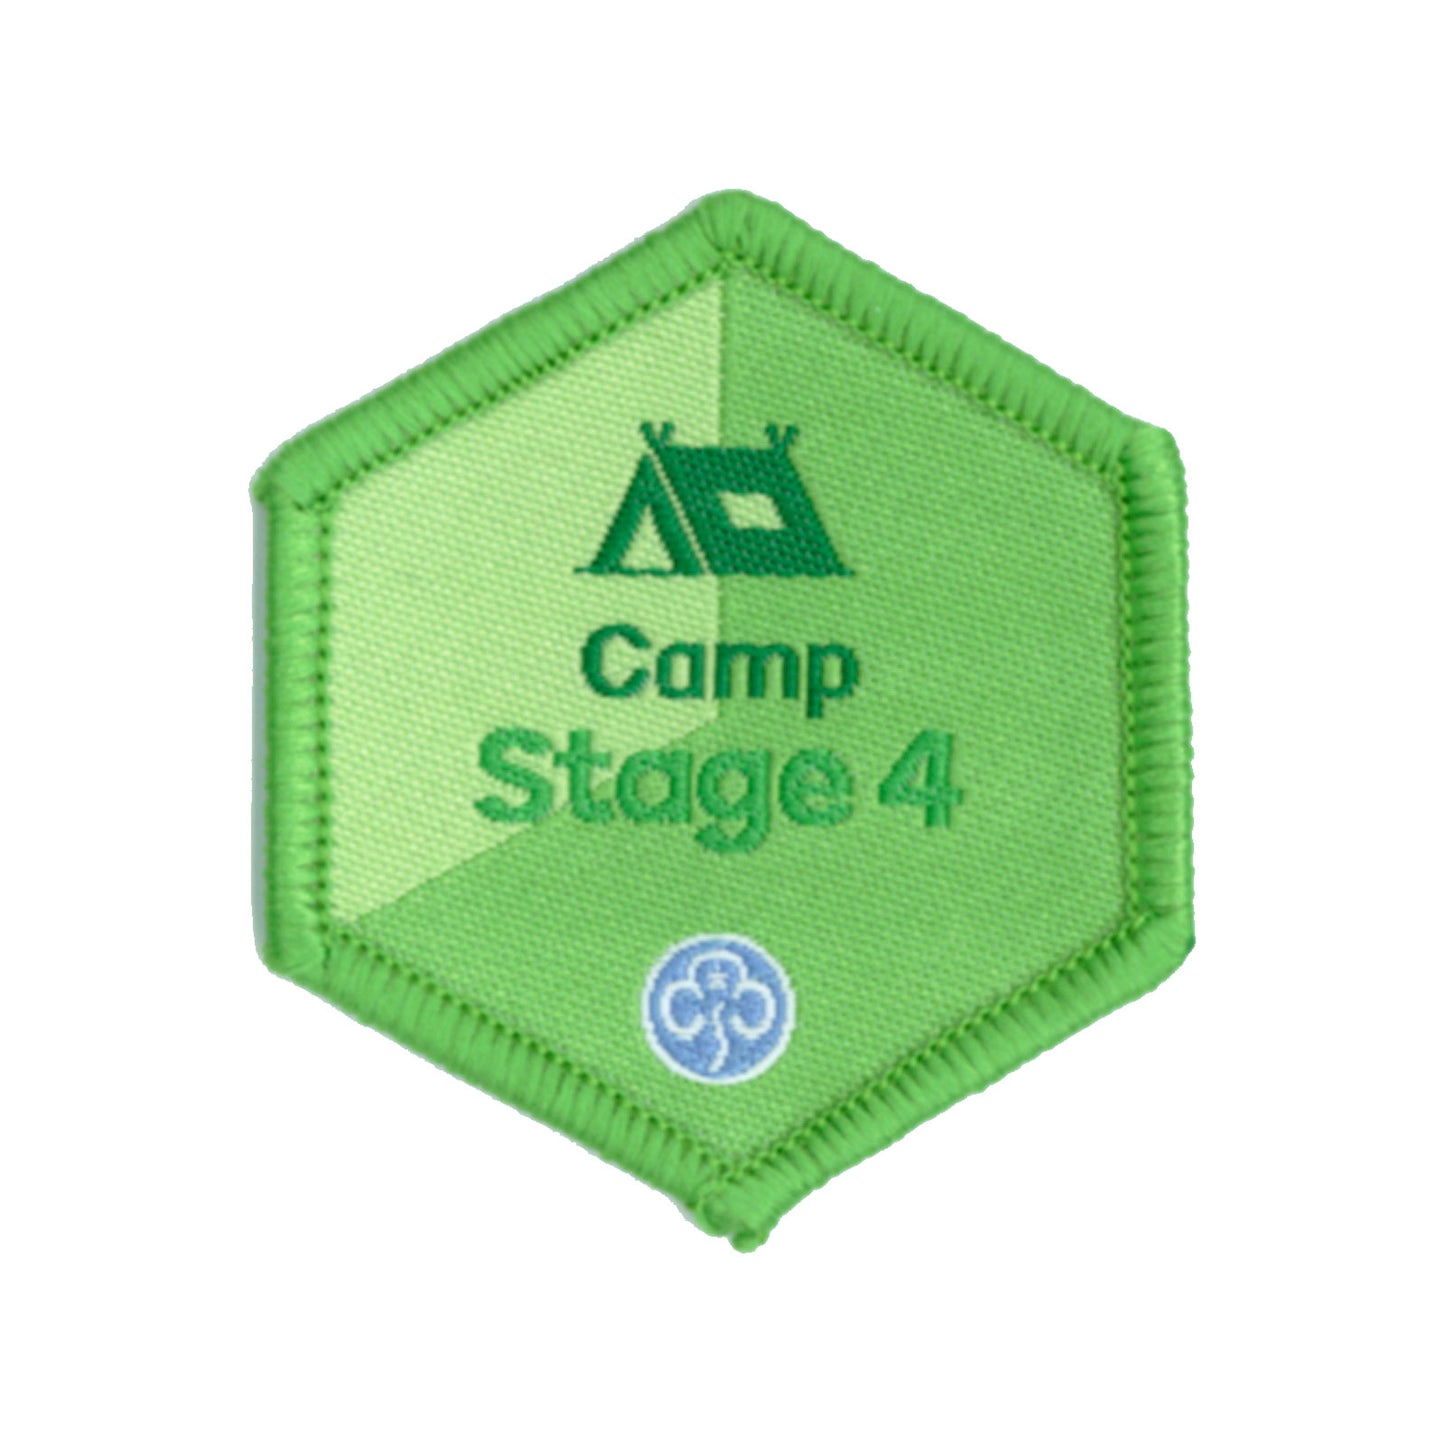 Skills Builder - Have Adventures - Camp Stage 4 Woven Badge